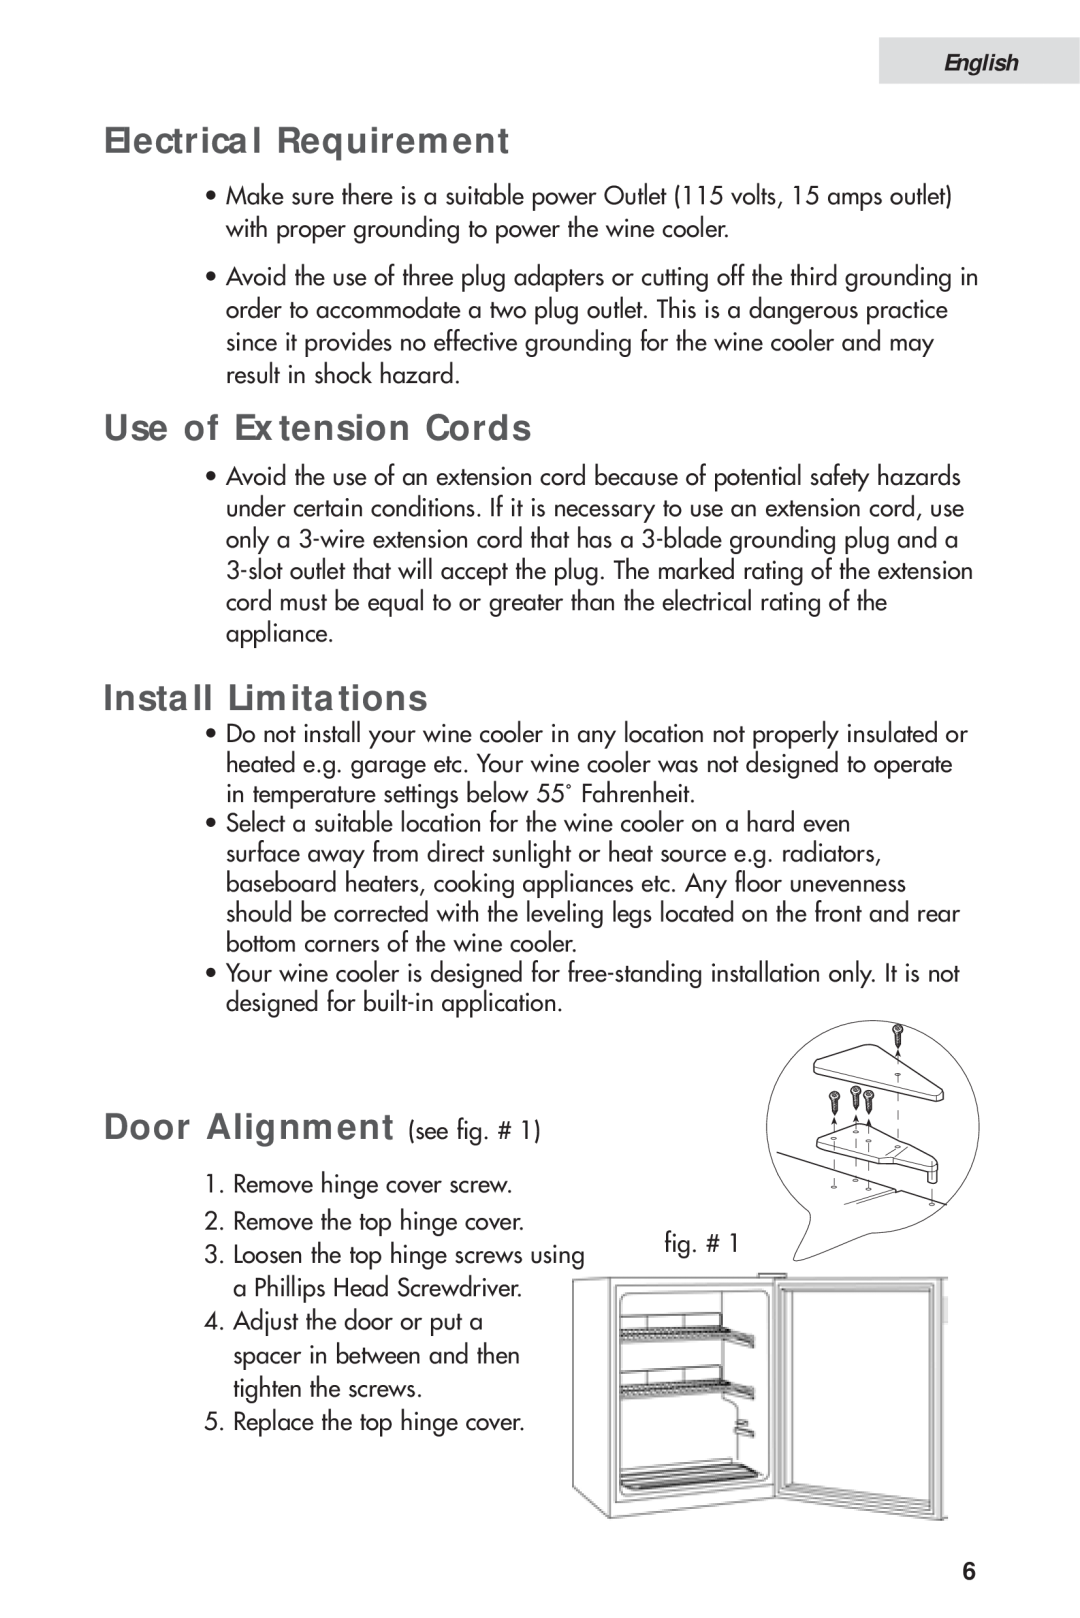 Haier HVH014A Electrical Requirement, Use of Extension Cords, Install Limitations, Door Alignment see fig. #, English 